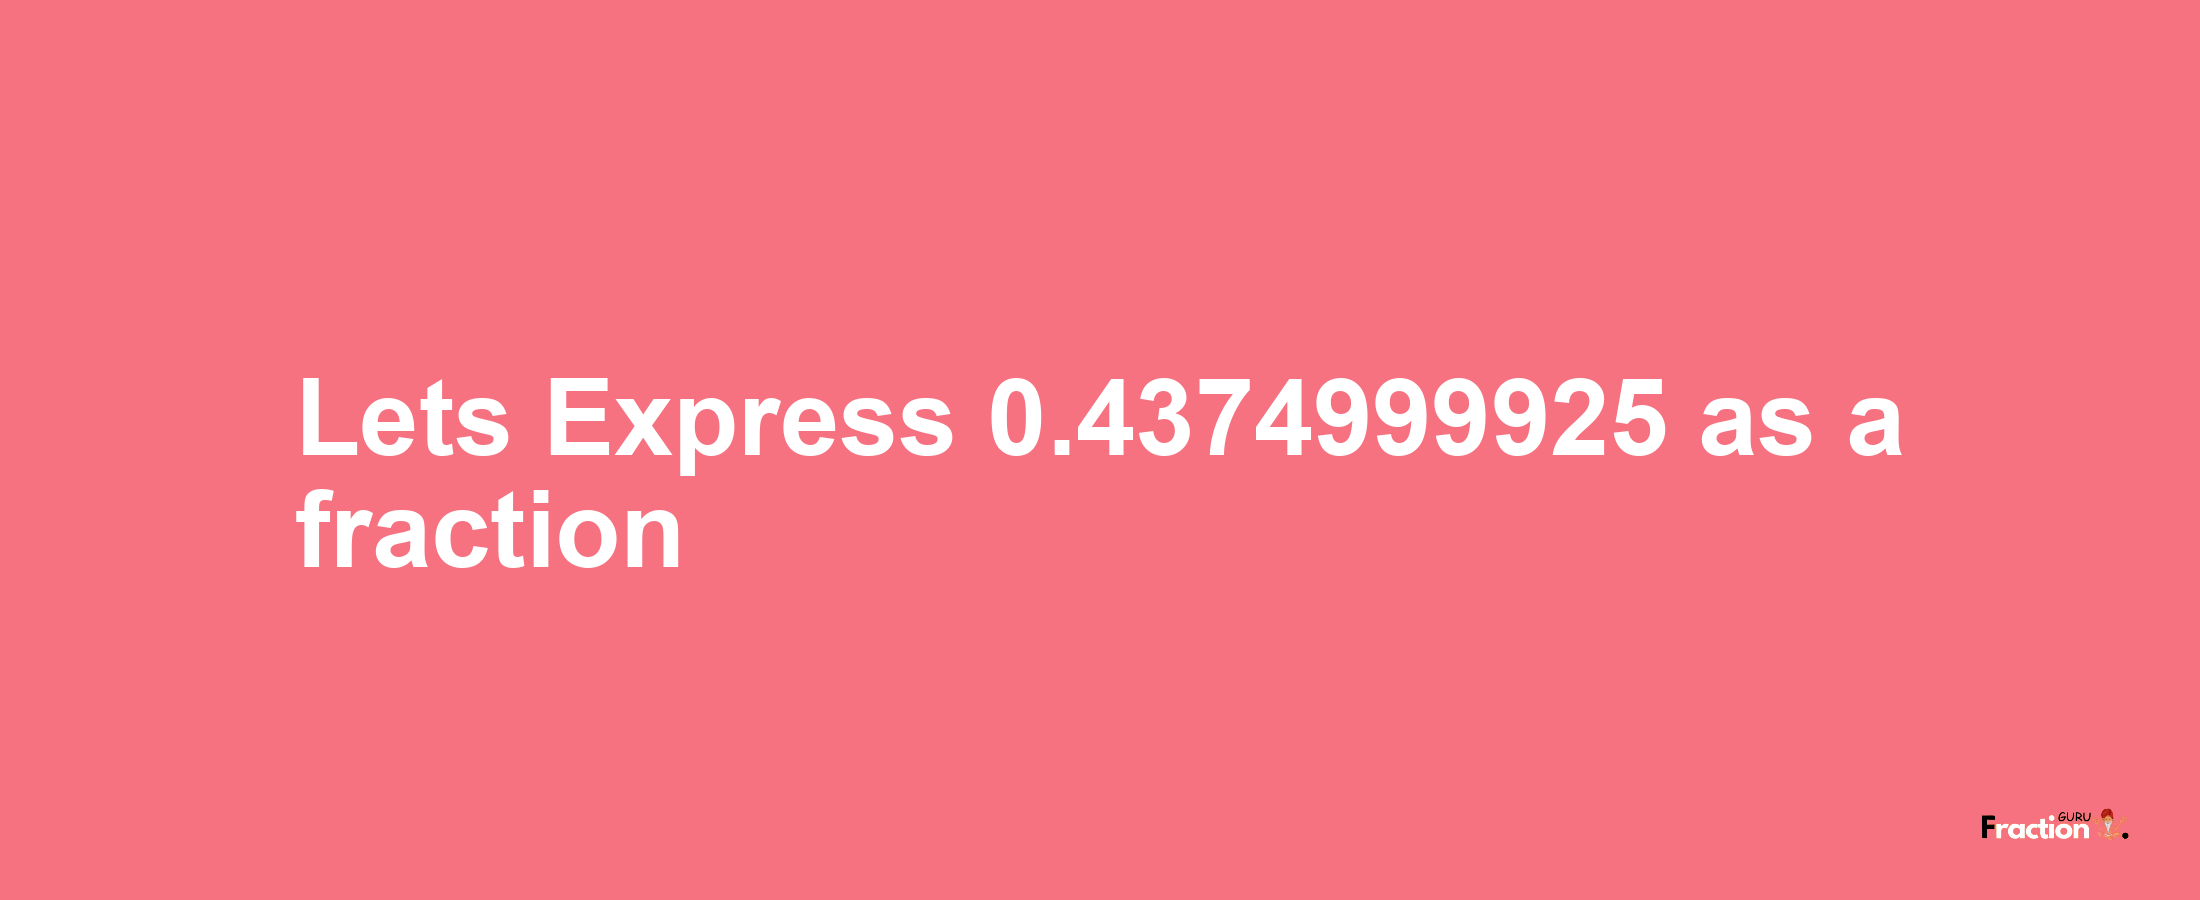 Lets Express 0.4374999925 as afraction